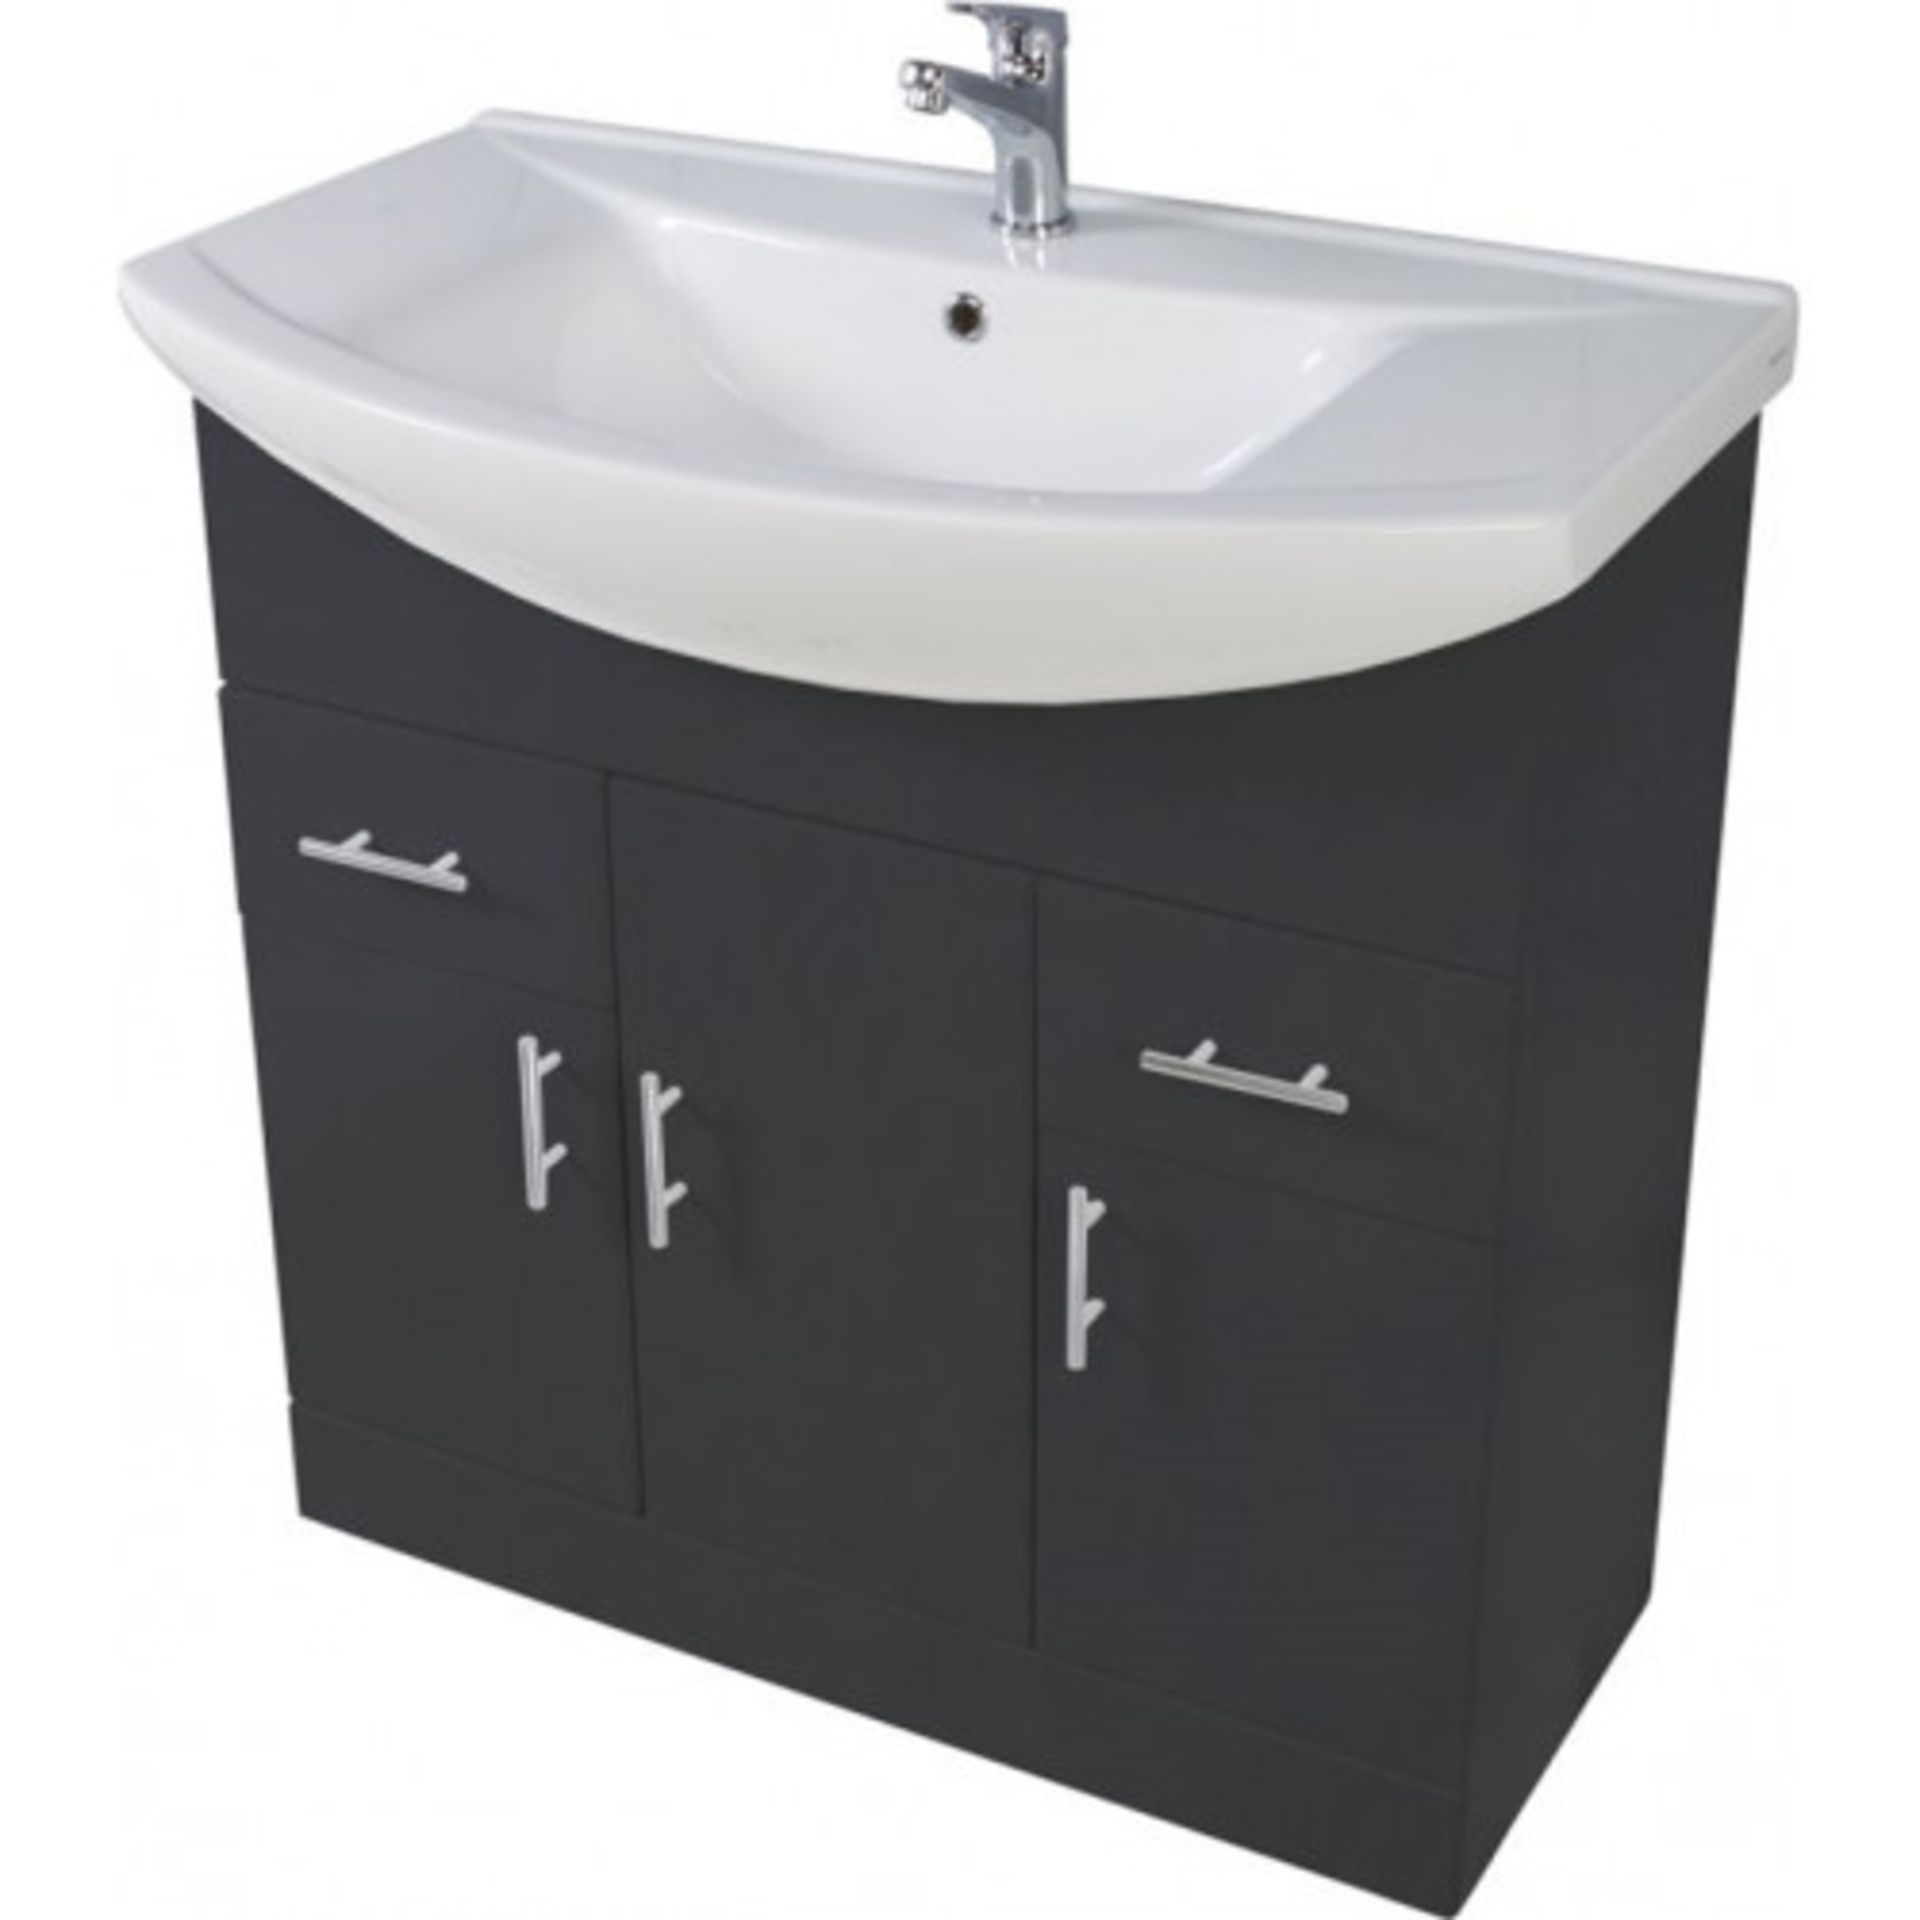 New (U110) Lanza 950mmanthracite Basin Unit. Rrp £227.51. Equipping You With Everything You N...